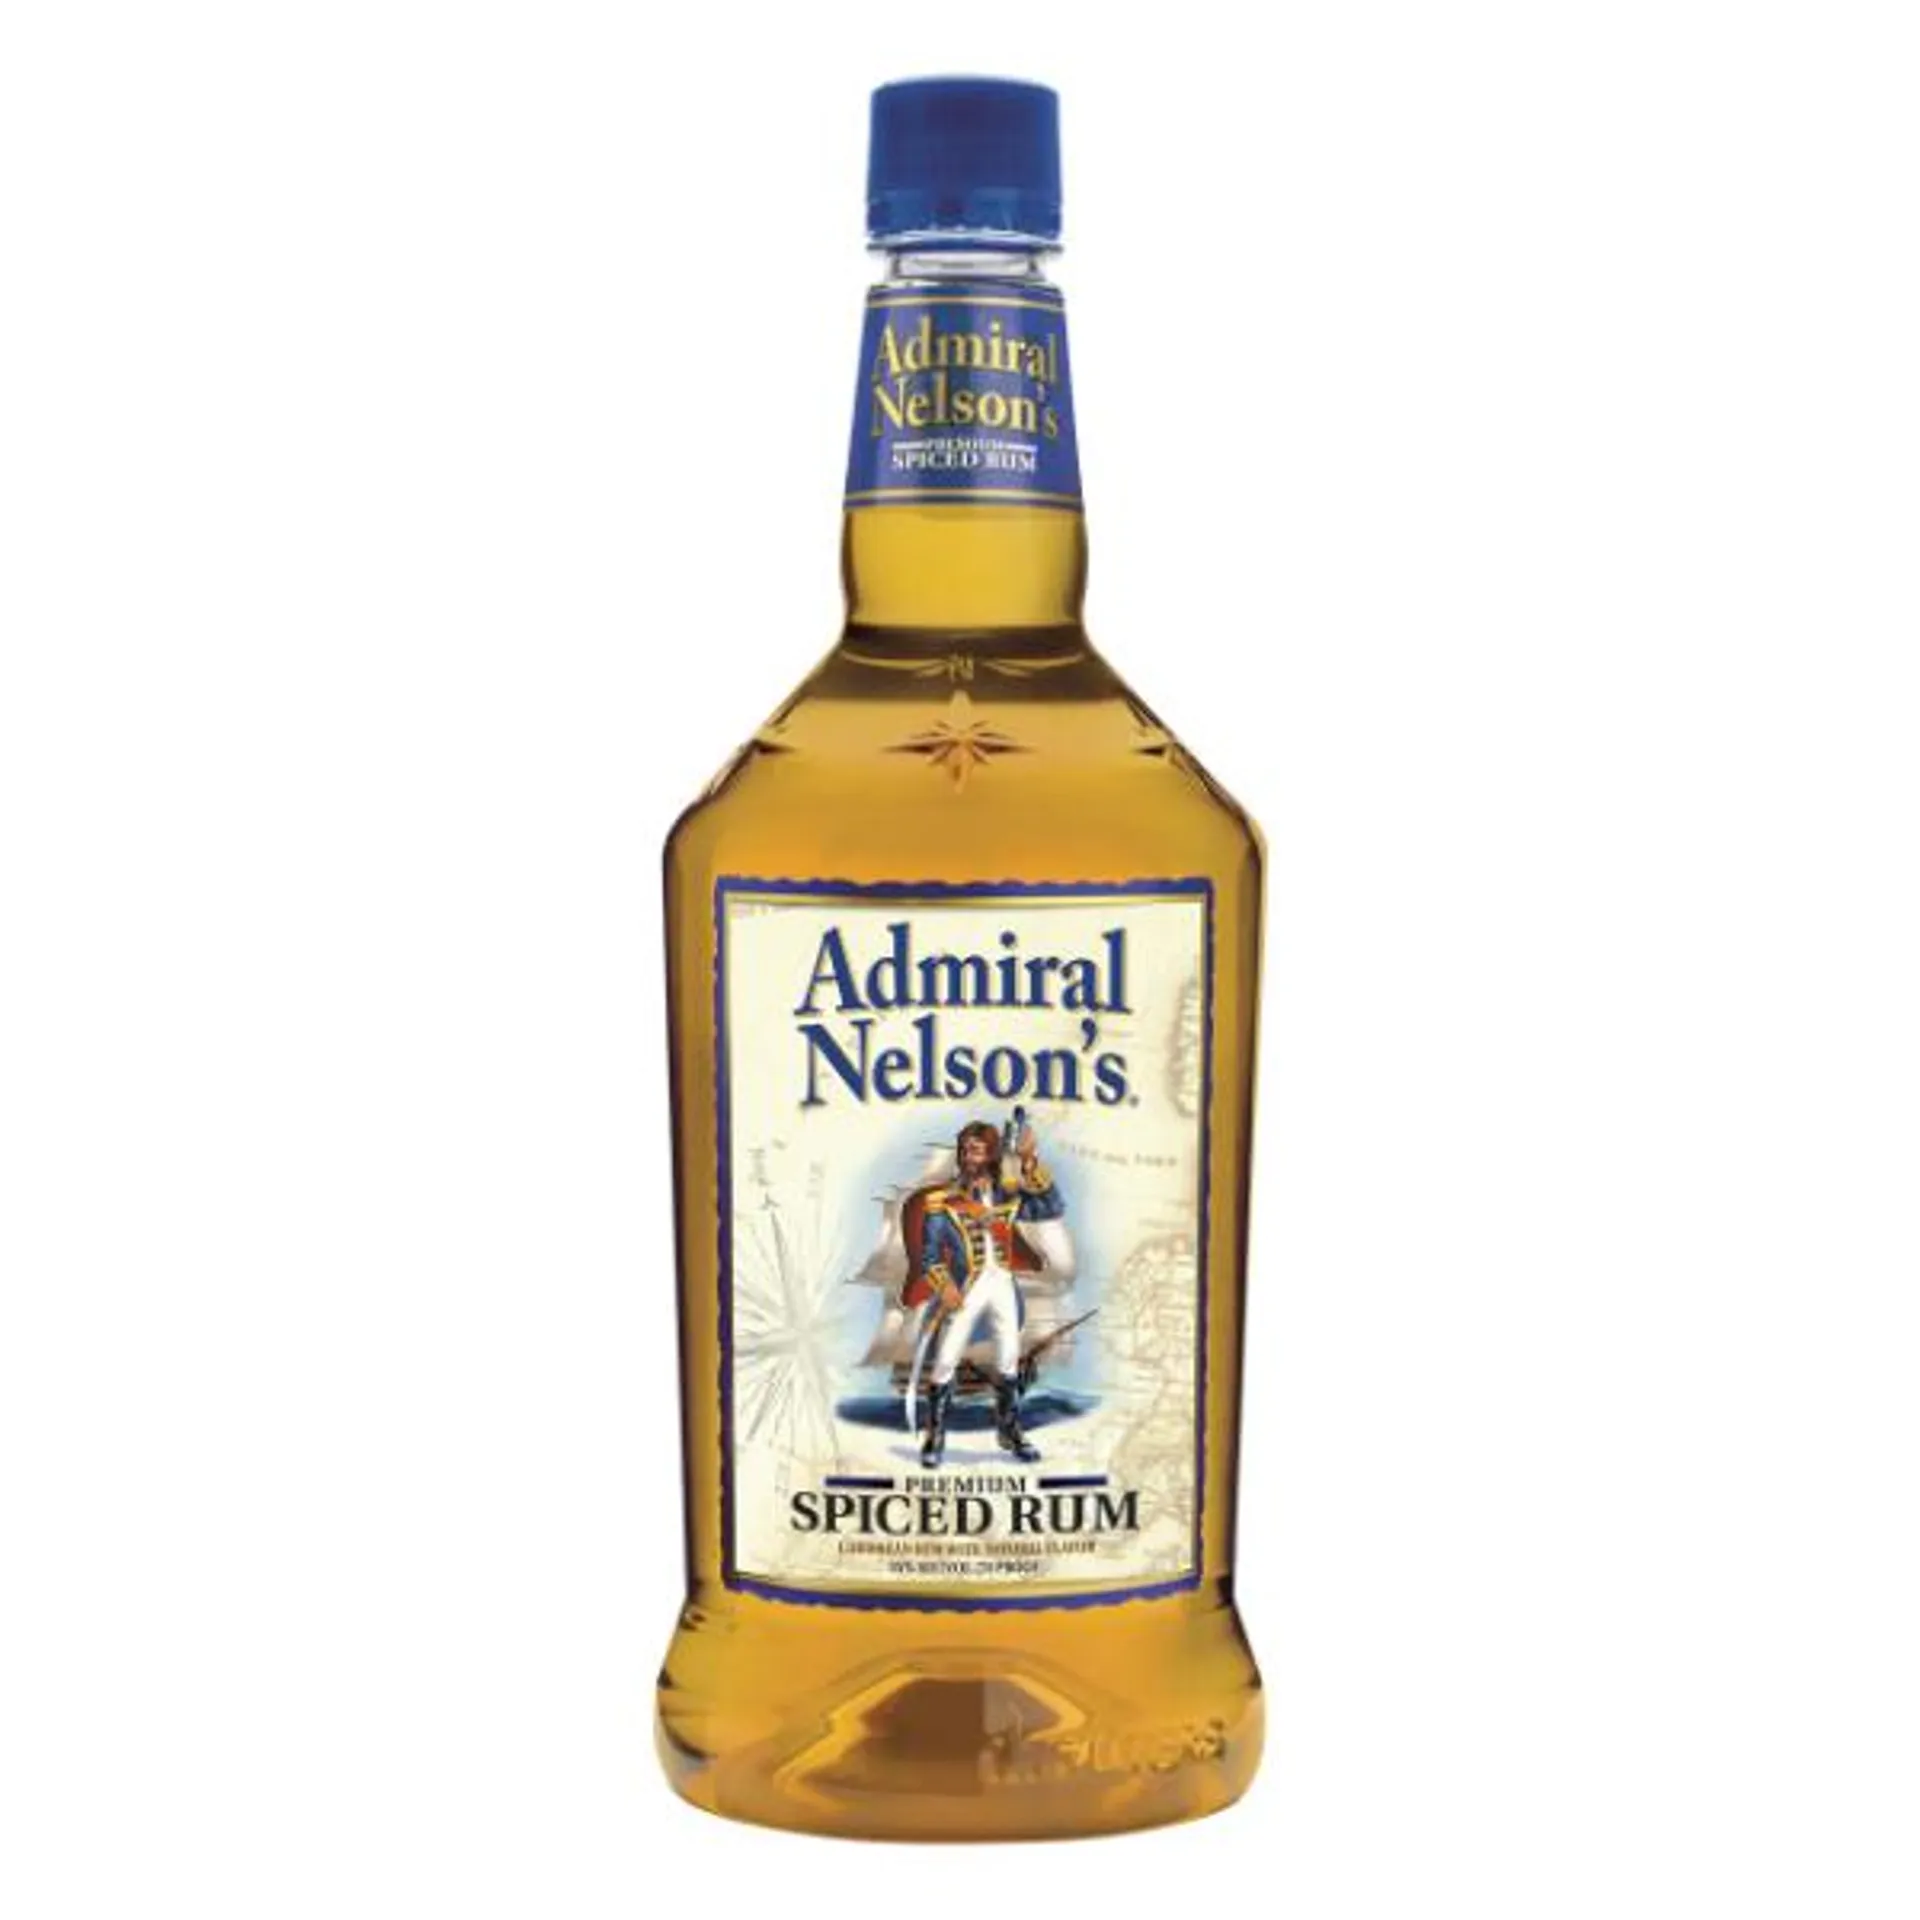 Admiral Nelson's Spiced Rum - 1.75 Litre